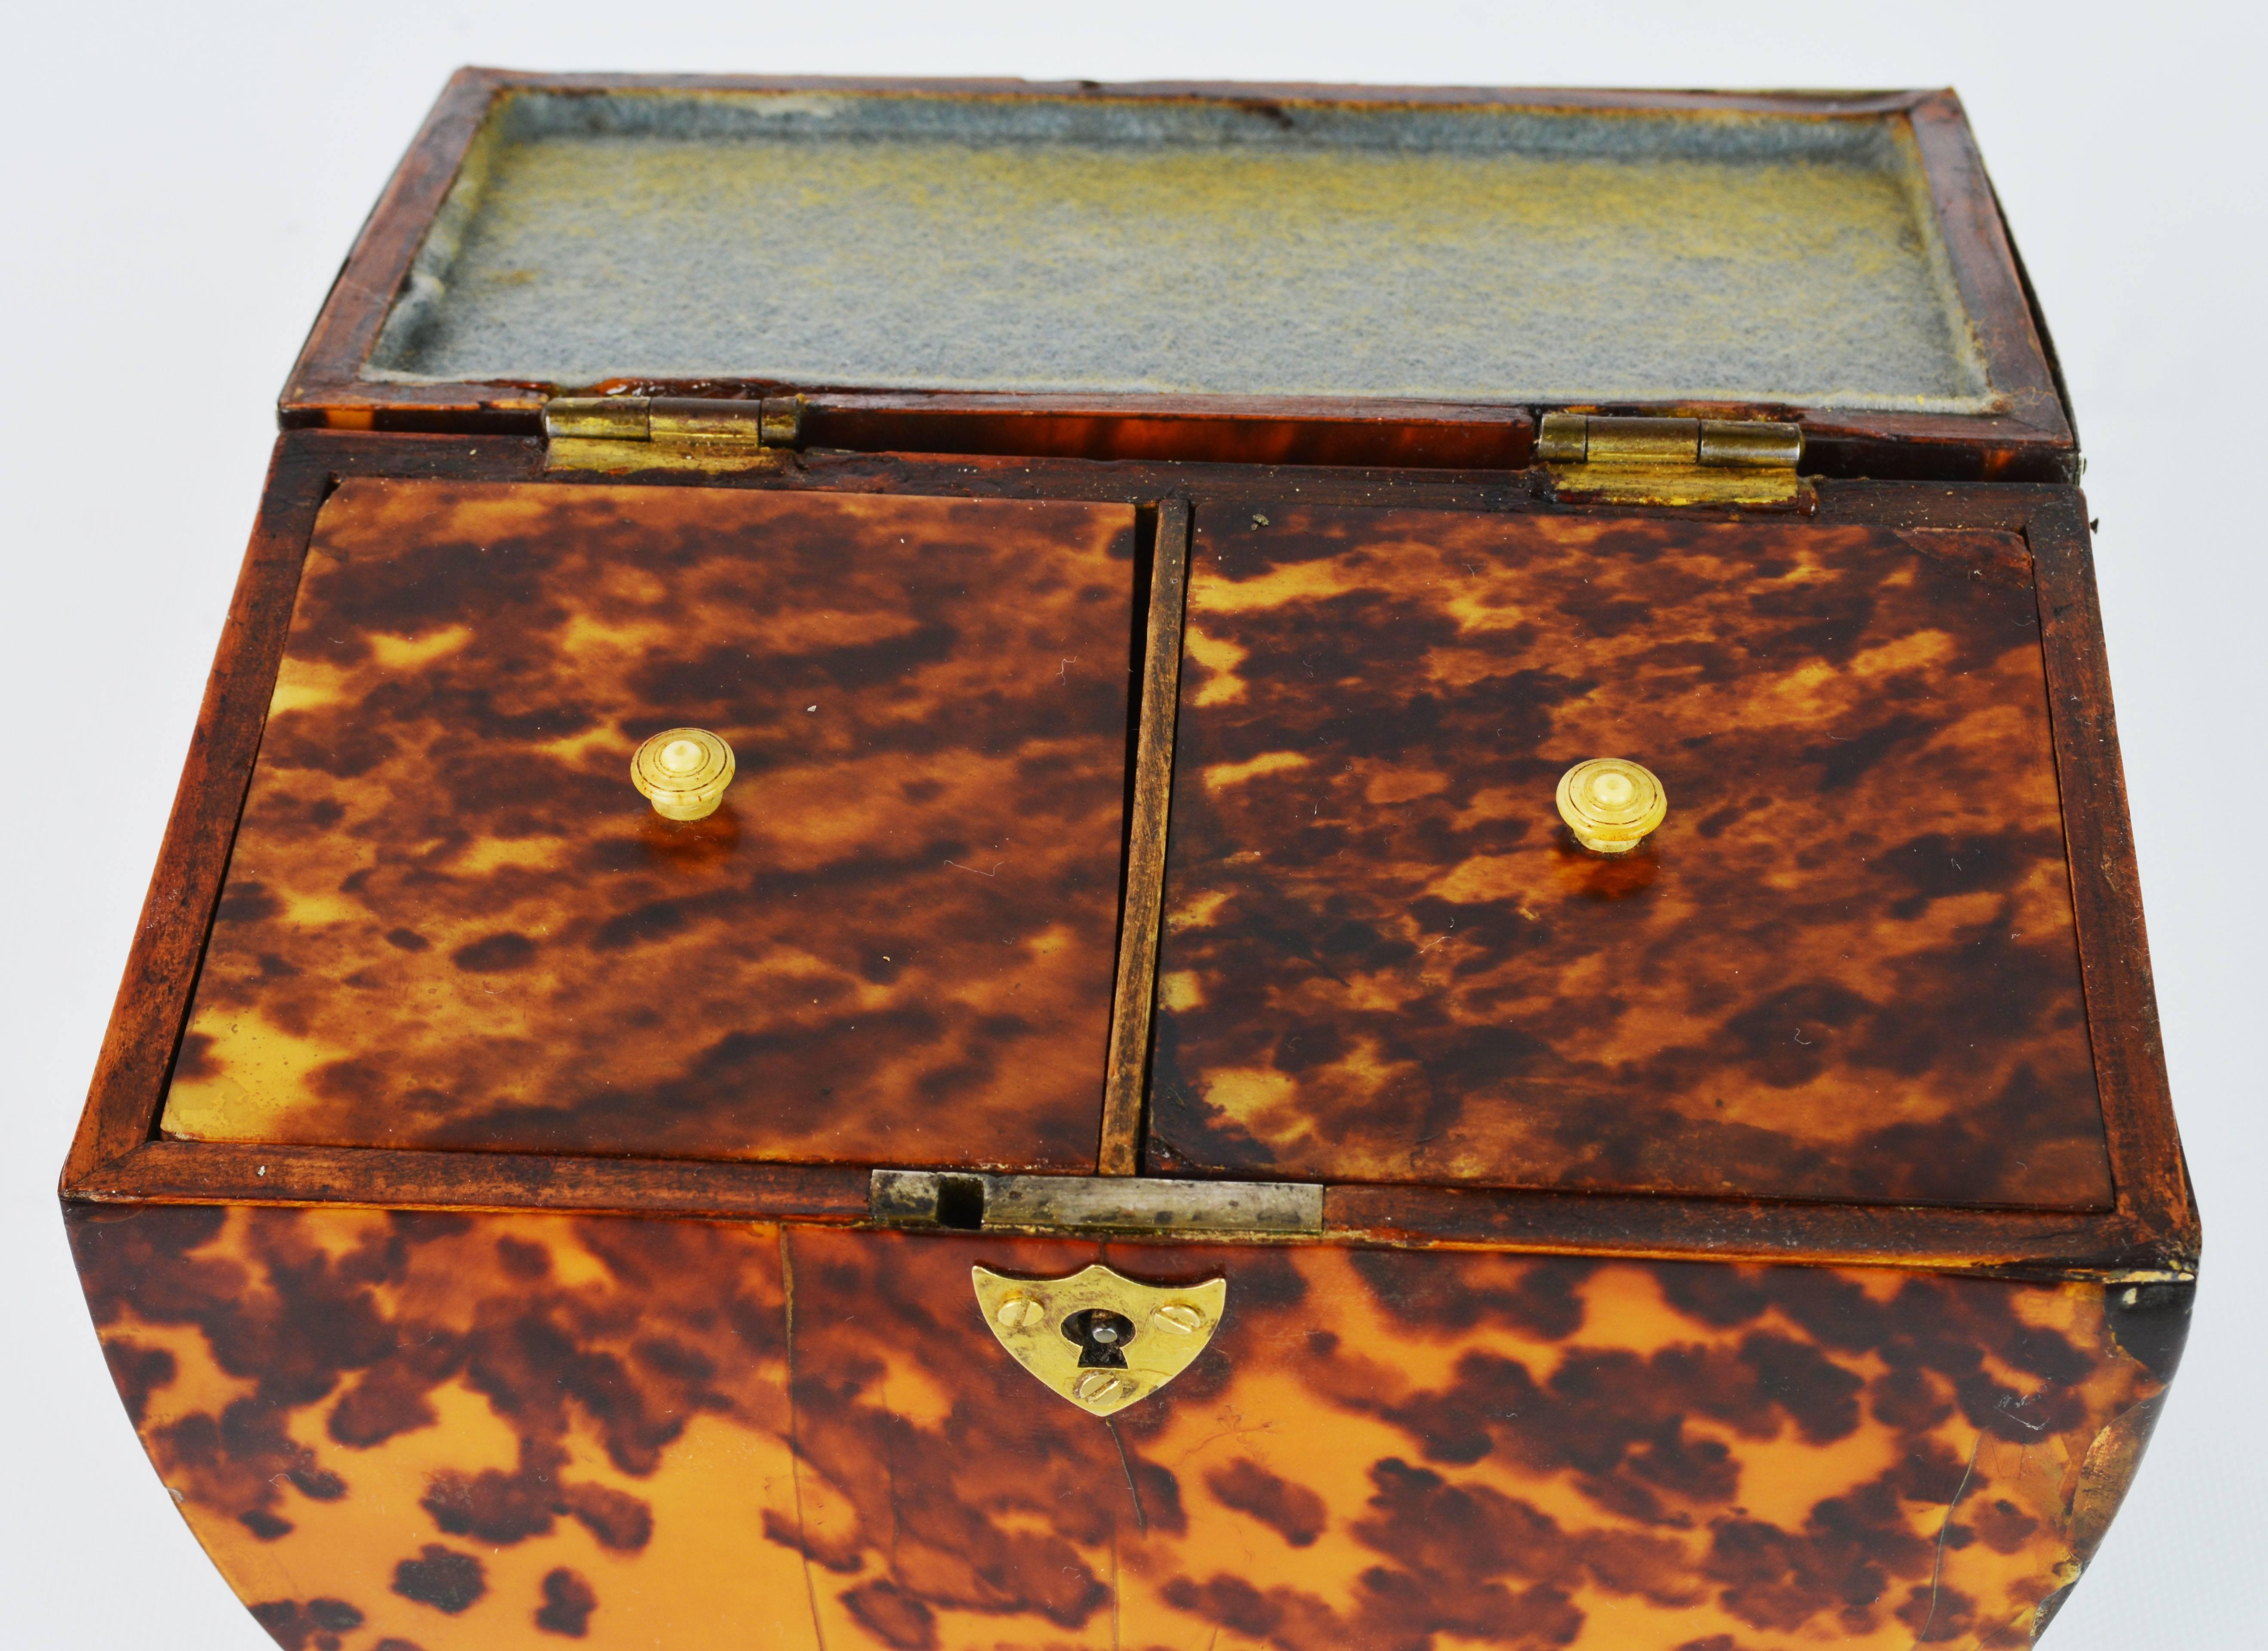 Lovely English Regency Tortoiseshell Footed Tea Caddy with Intach Interior 3